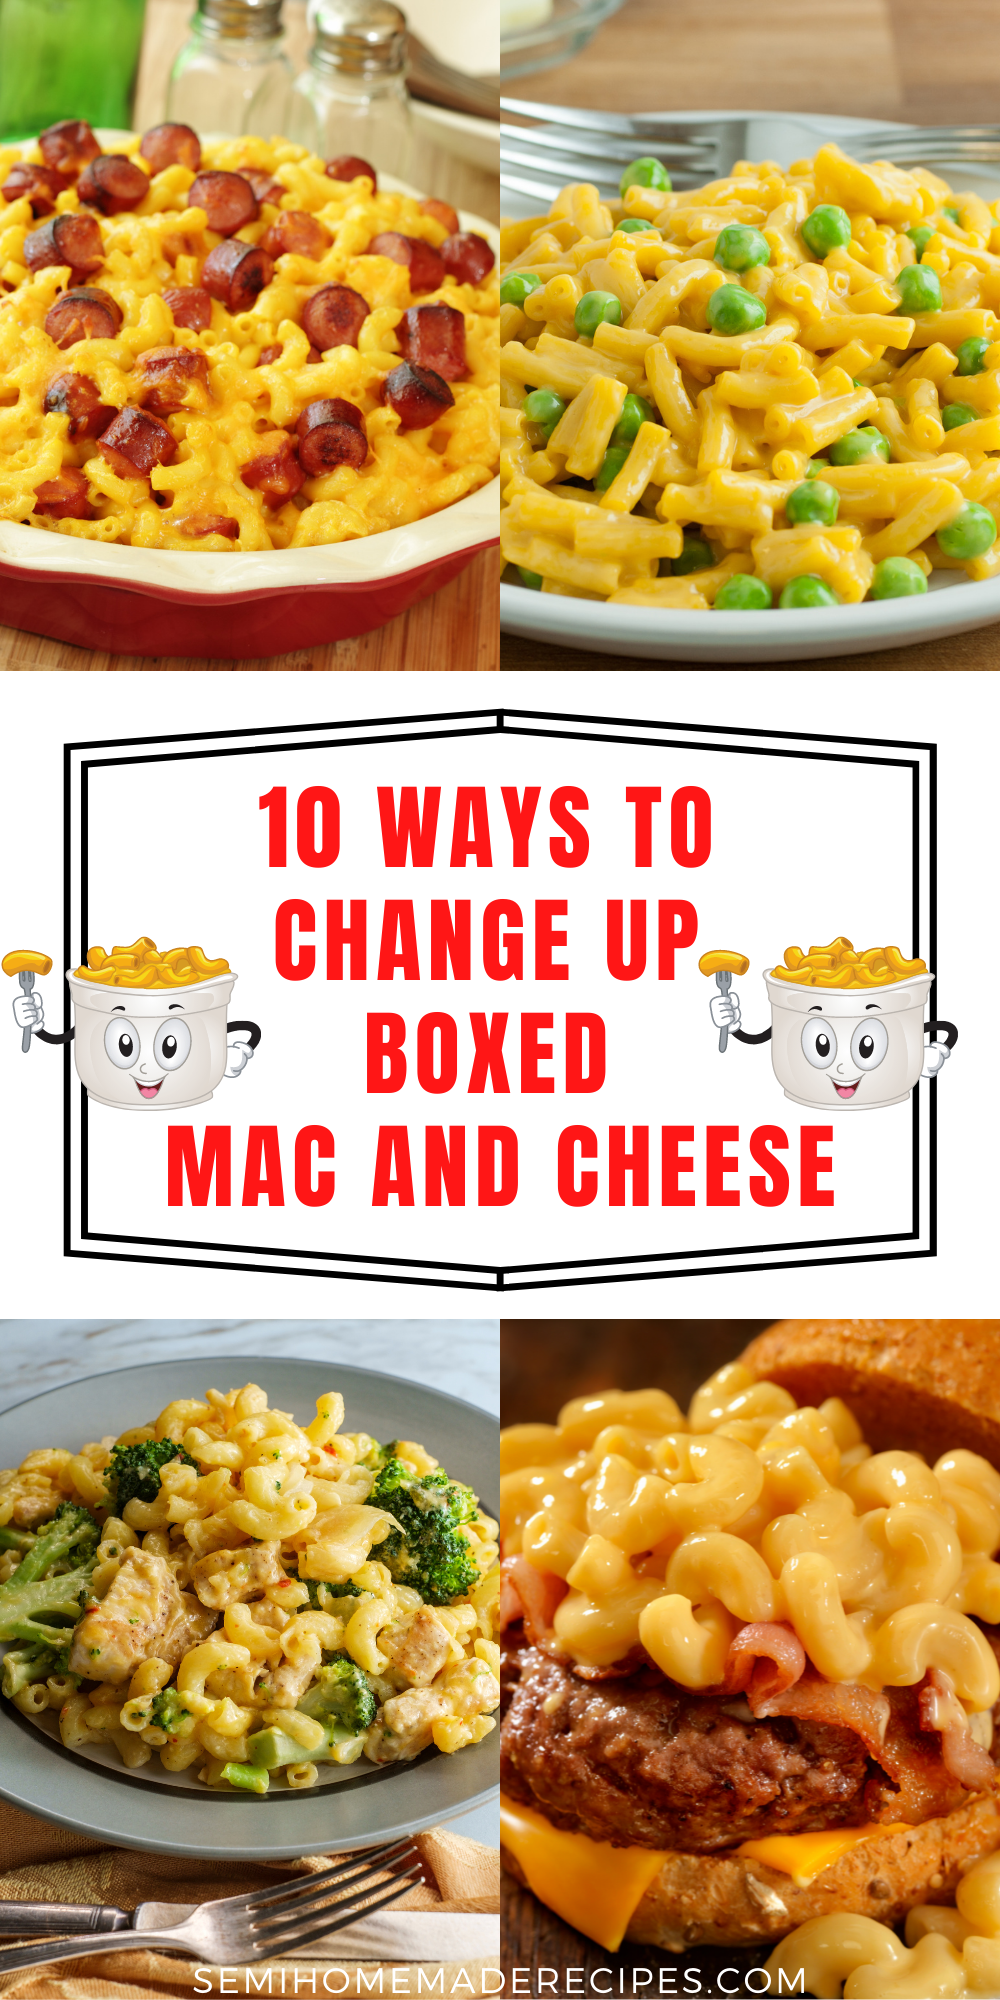 Love boxed mac and cheese but want to change it up a bit? No problem! I've got 10 10 Ways to Change Up Boxed Mac and Cheese for you, including adding ingredients to mac and cheese or adding the mac and cheese to other meals!